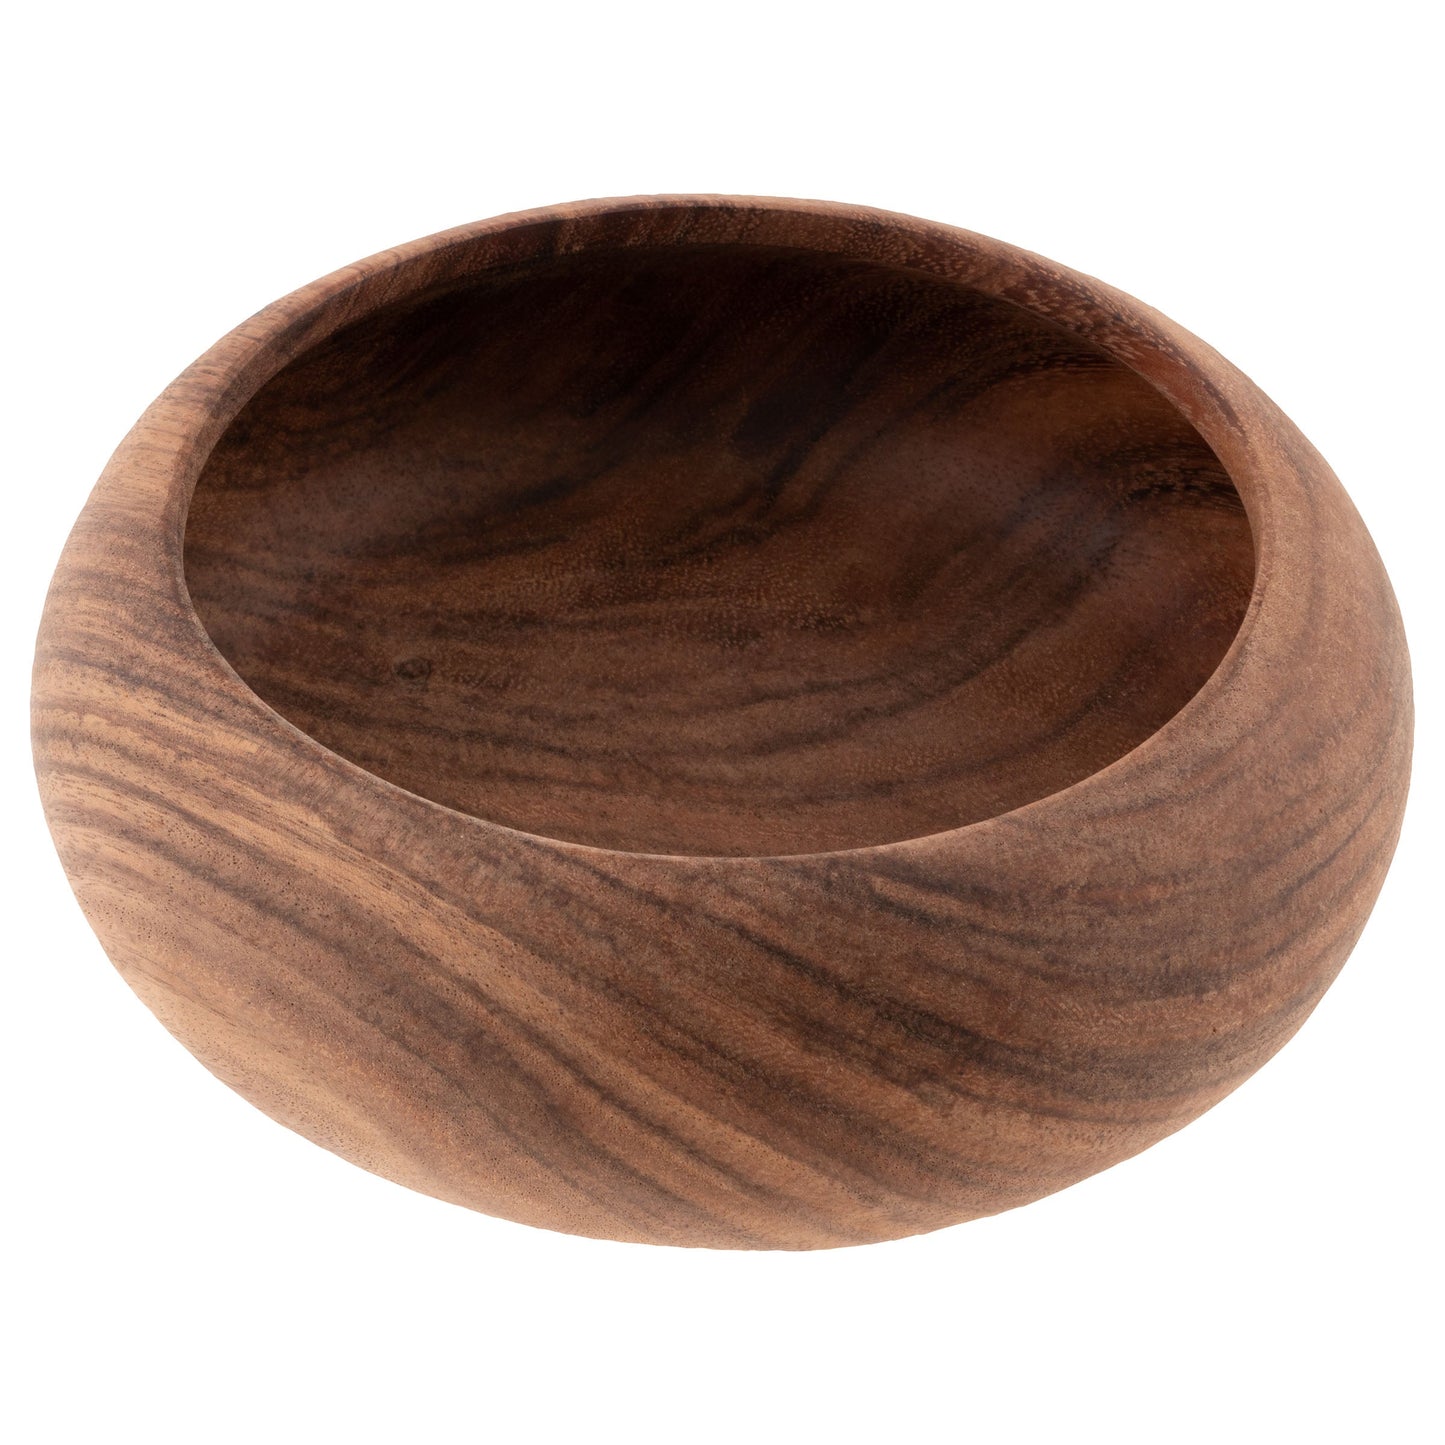 small round wooden bowl on a white background.